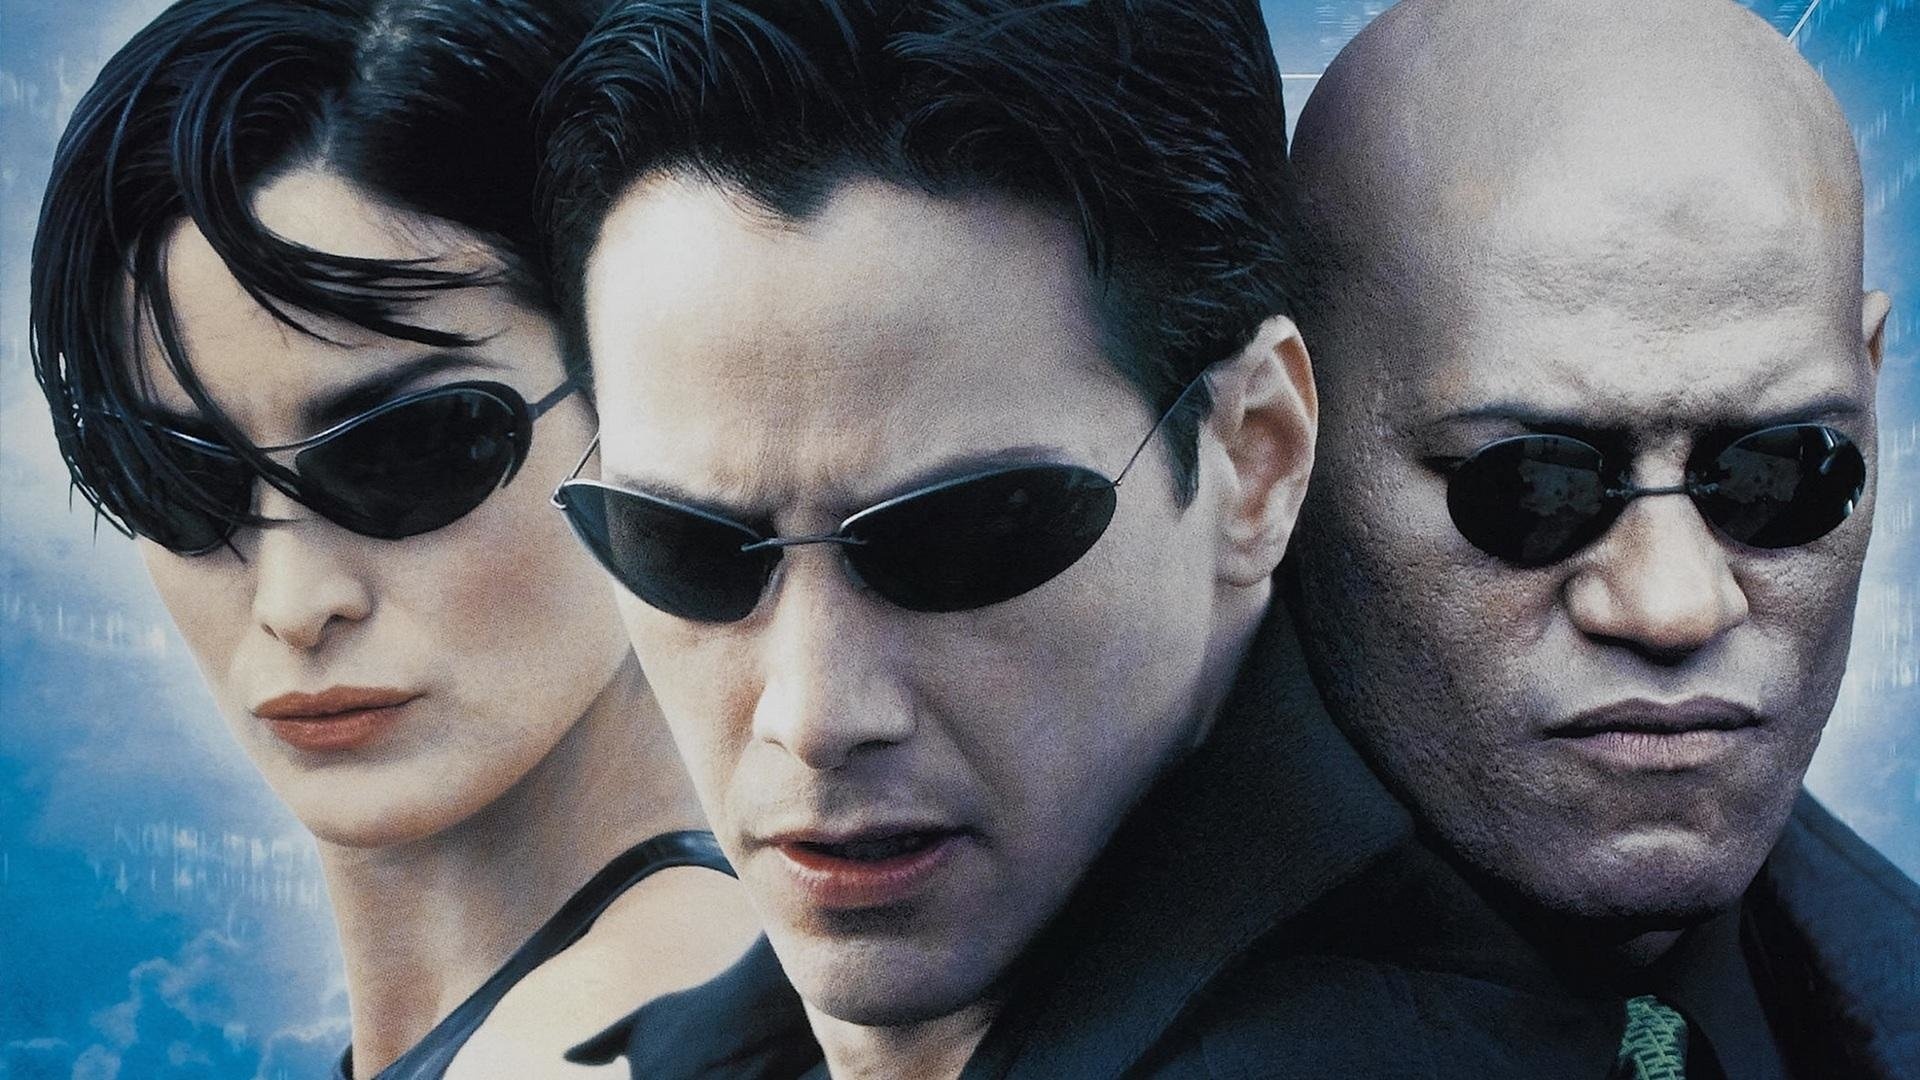 The Matrix: Neo, A fictional character and the protagonist, The One. 1920x1080 Full HD Wallpaper.